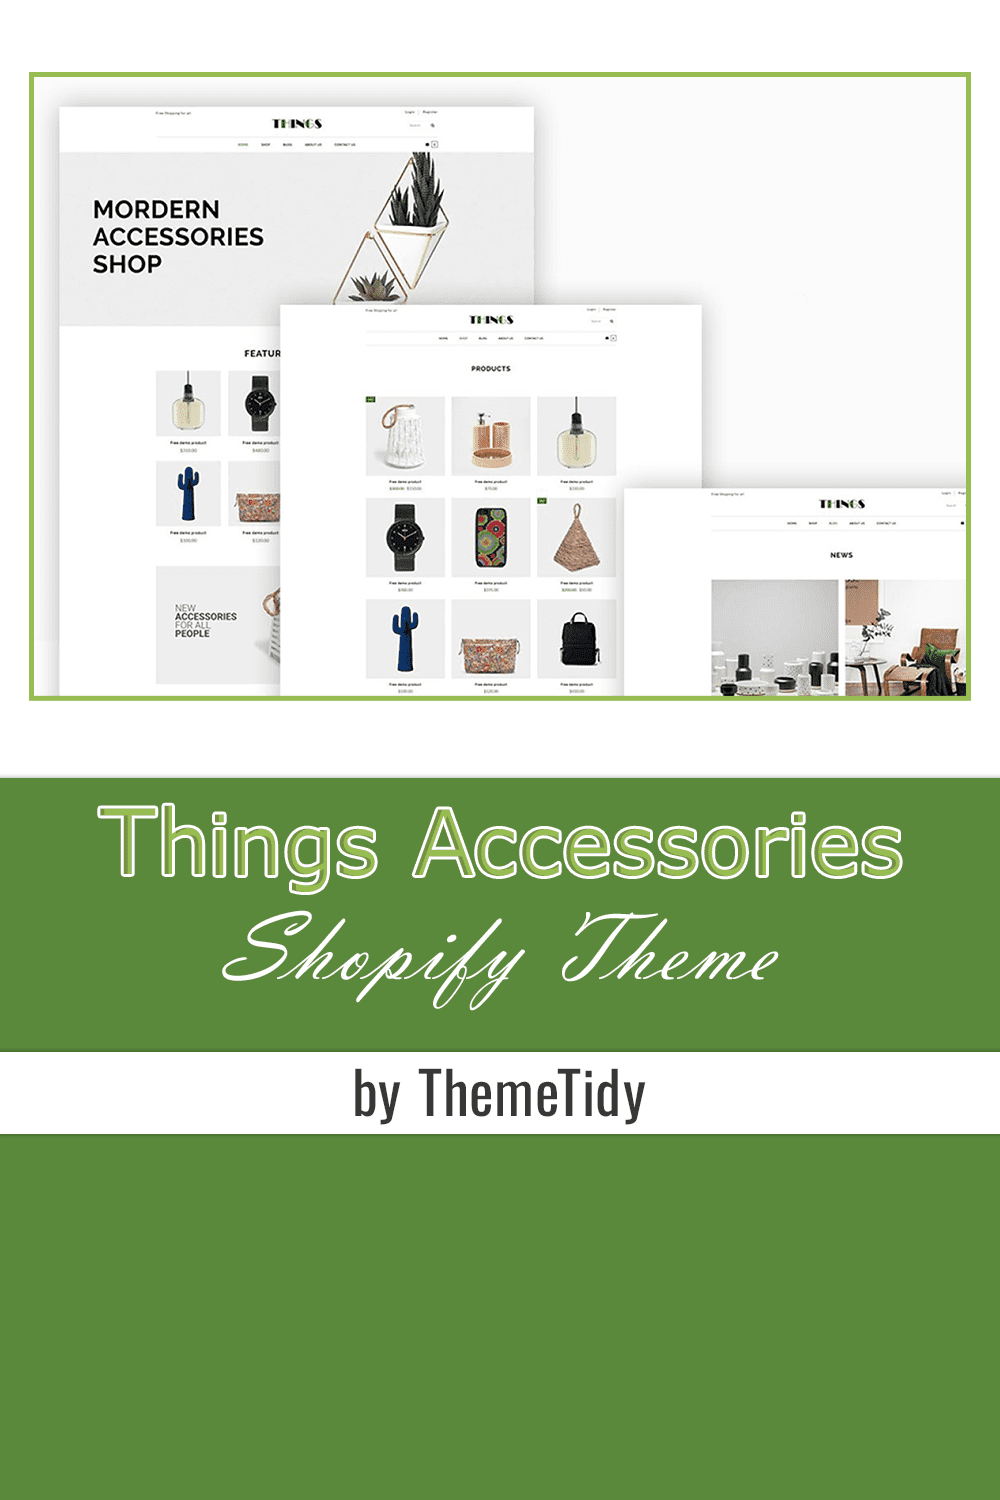 Things Accessories Shopify Theme - pinterest image preview.